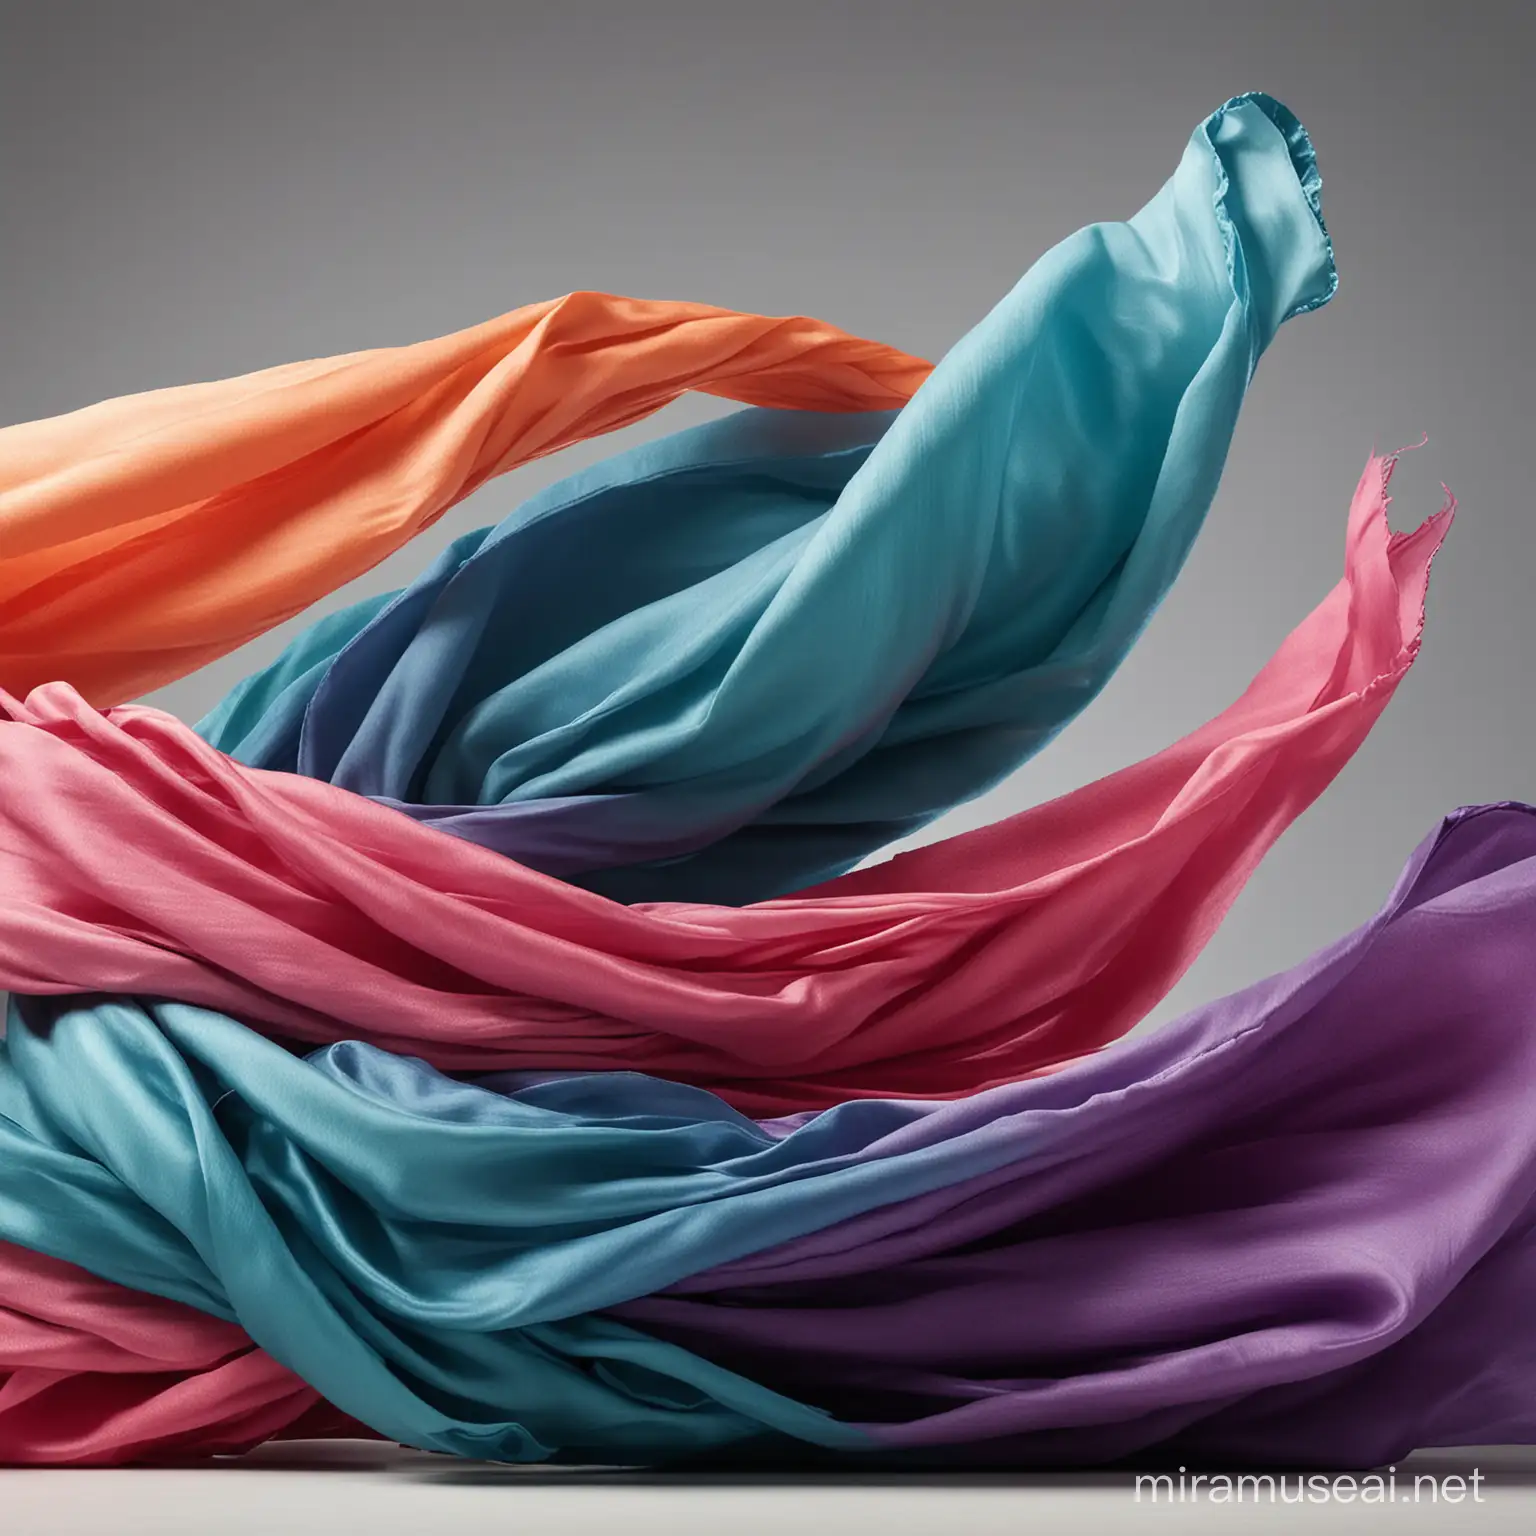 close up photo of 4 large different colored fabric blowing in the wind. Photo taken in a studio. 